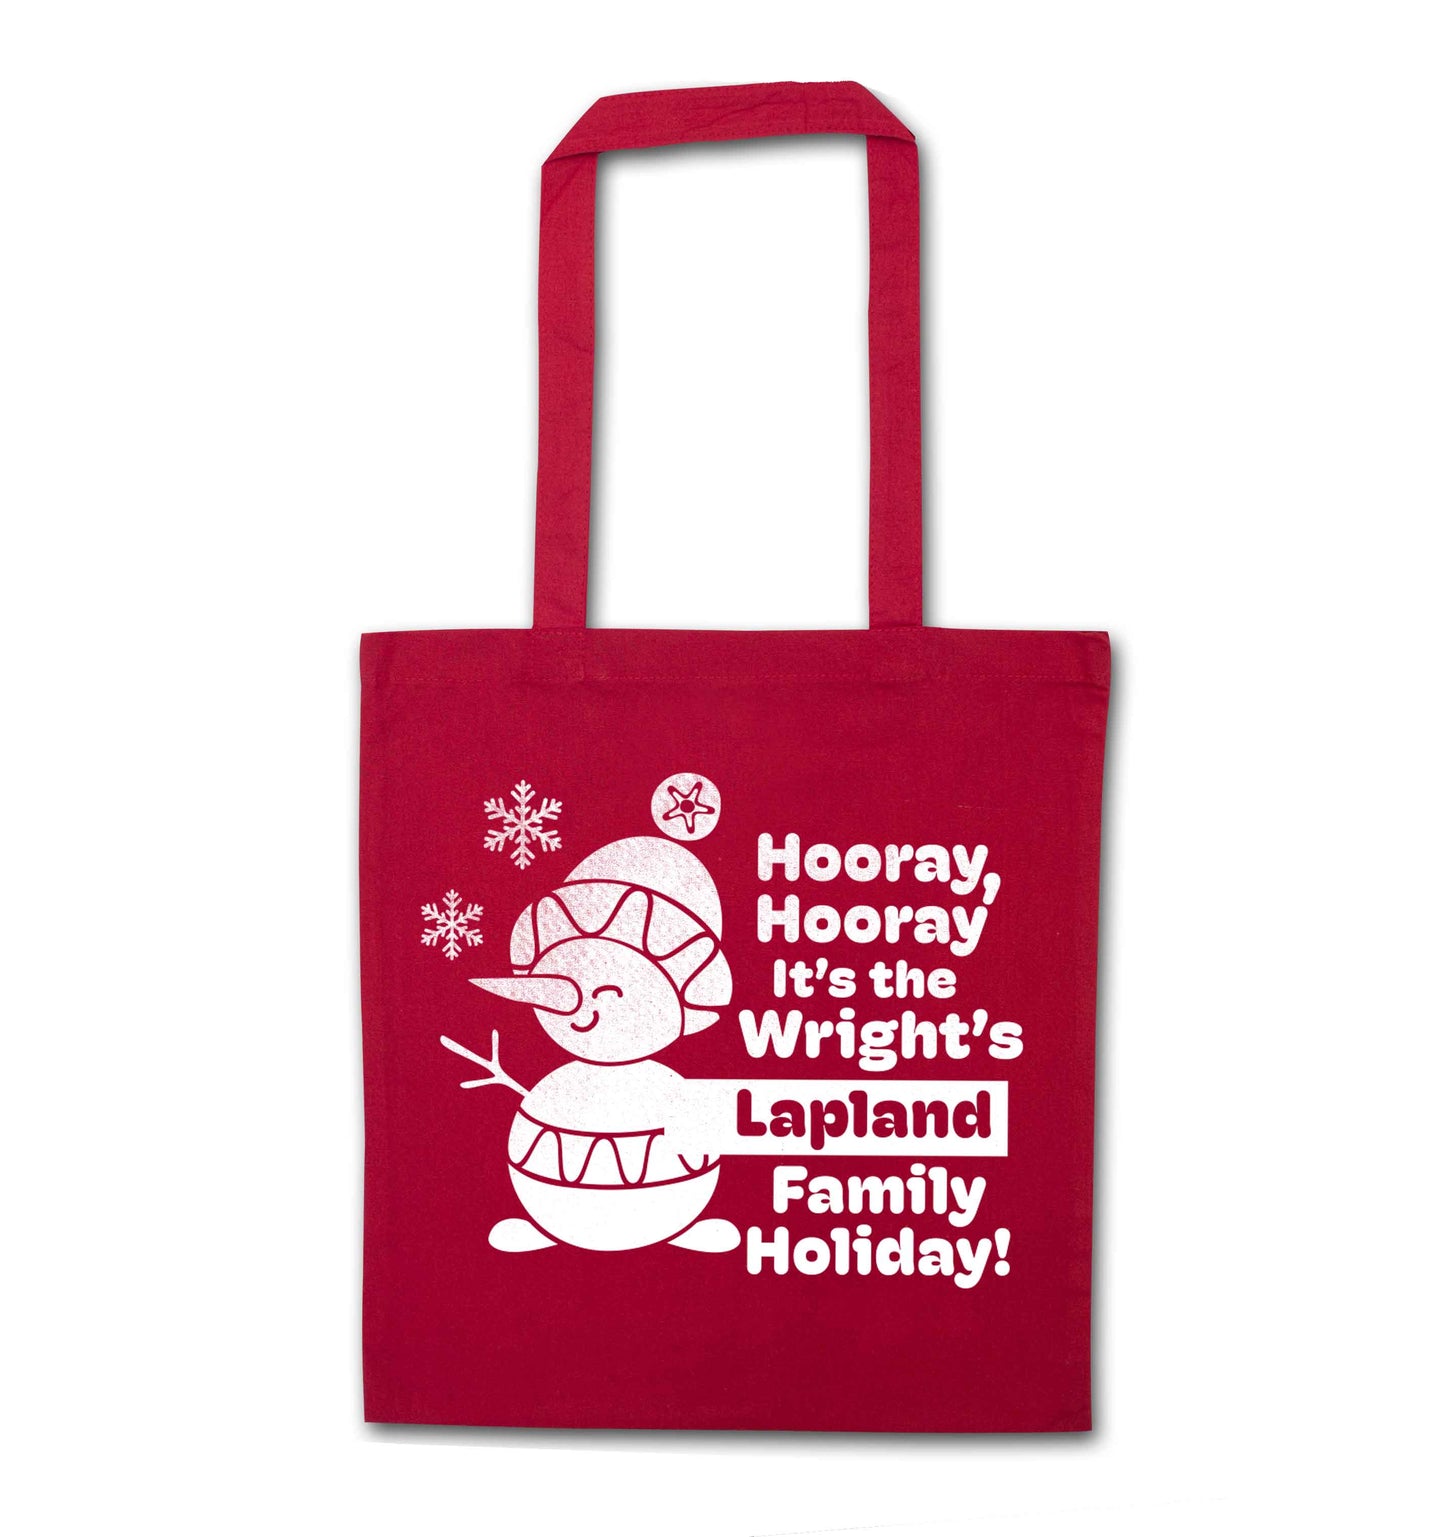 Hooray it's the personalised Lapland holiday! red tote bag